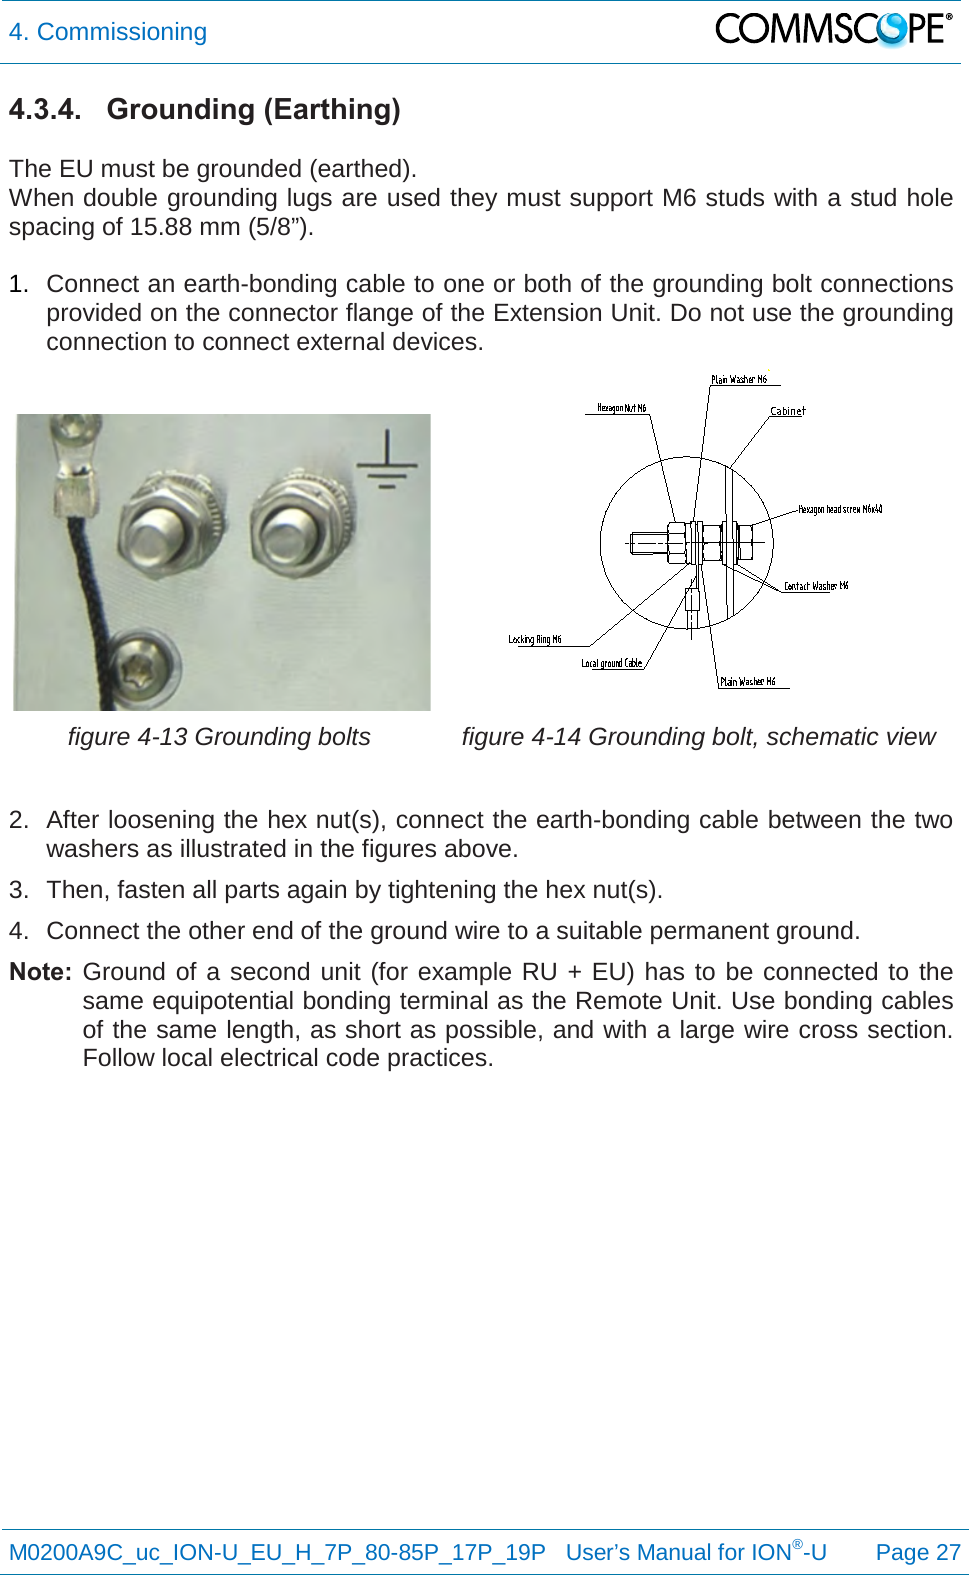 4. Commissioning   M0200A9C_uc_ION-U_EU_H_7P_80-85P_17P_19P   User’s Manual for ION®-U  Page 27  4.3.4. Grounding (Earthing)  The EU must be grounded (earthed). When double grounding lugs are used they must support M6 studs with a stud hole spacing of 15.88 mm (5/8”).  1. Connect an earth-bonding cable to one or both of the grounding bolt connections provided on the connector flange of the Extension Unit. Do not use the grounding connection to connect external devices.   figure 4-13 Grounding bolts  figure 4-14 Grounding bolt, schematic view  2. After loosening the hex nut(s), connect the earth-bonding cable between the two washers as illustrated in the figures above. 3. Then, fasten all parts again by tightening the hex nut(s). 4. Connect the other end of the ground wire to a suitable permanent ground. Note: Ground of a second unit (for example RU + EU) has to be connected to the same equipotential bonding terminal as the Remote Unit. Use bonding cables of the same length, as short as possible, and with a large wire cross section. Follow local electrical code practices.   